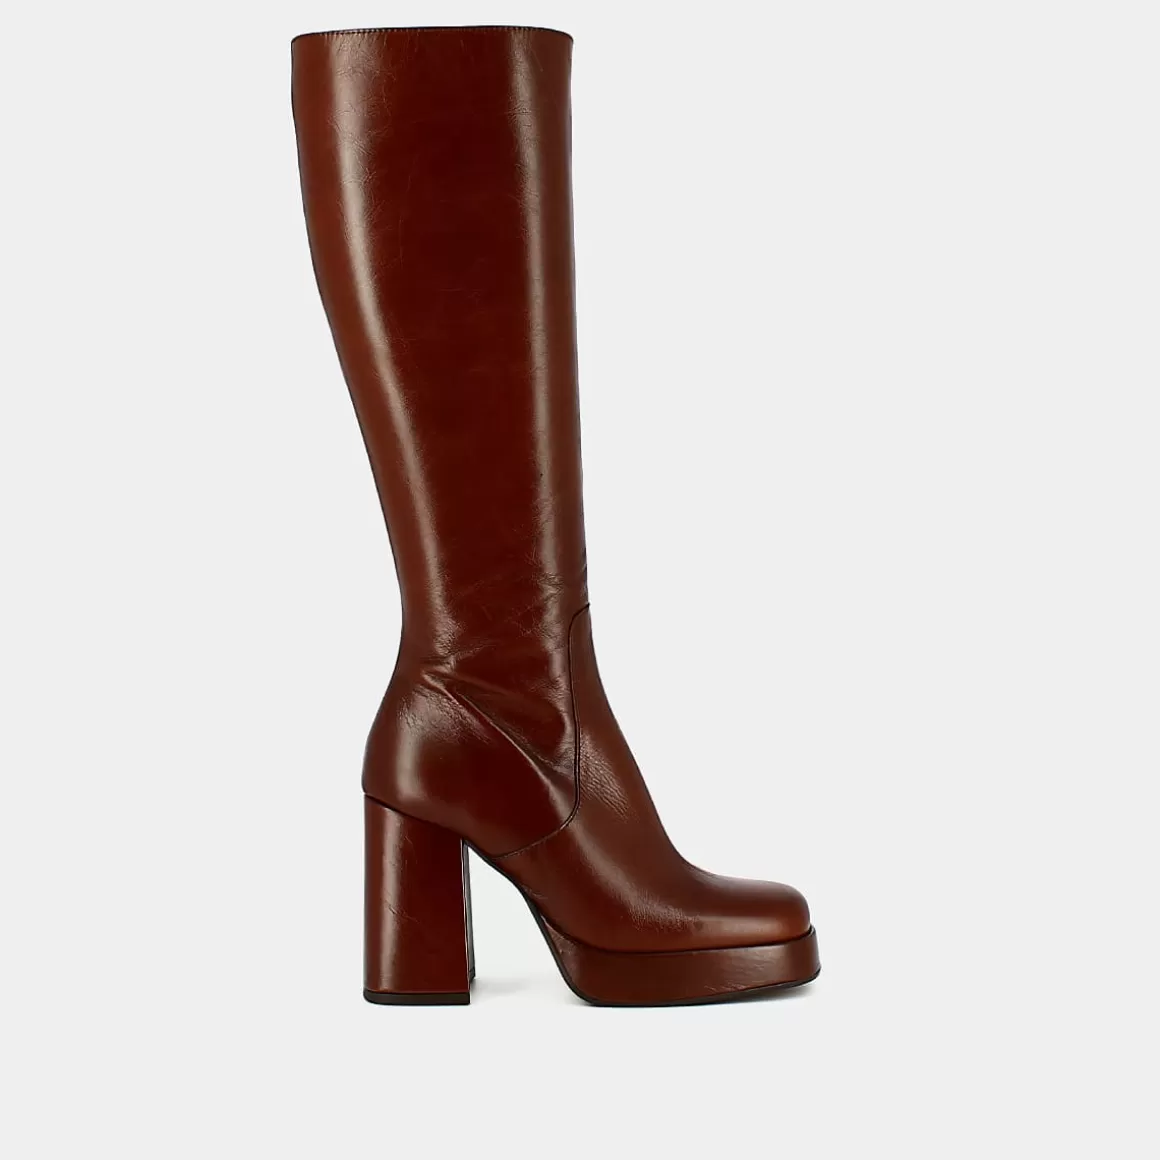 Boots with heels and square toes<Jonak Flash Sale